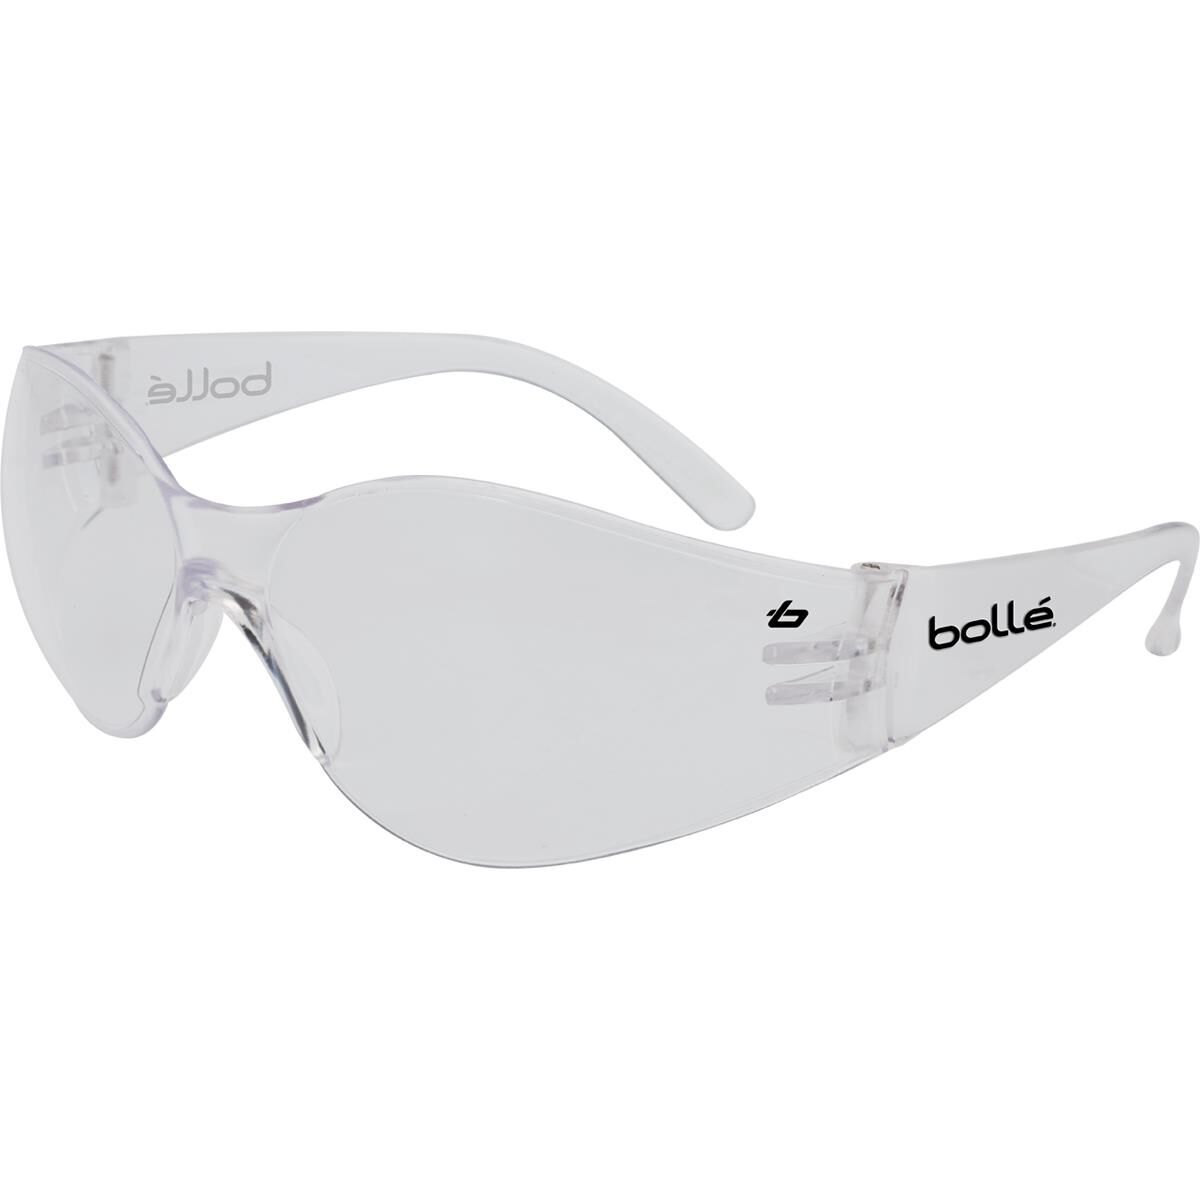 Bolle Safety Glasses - Bandido, Clear, , scaau_hi-res